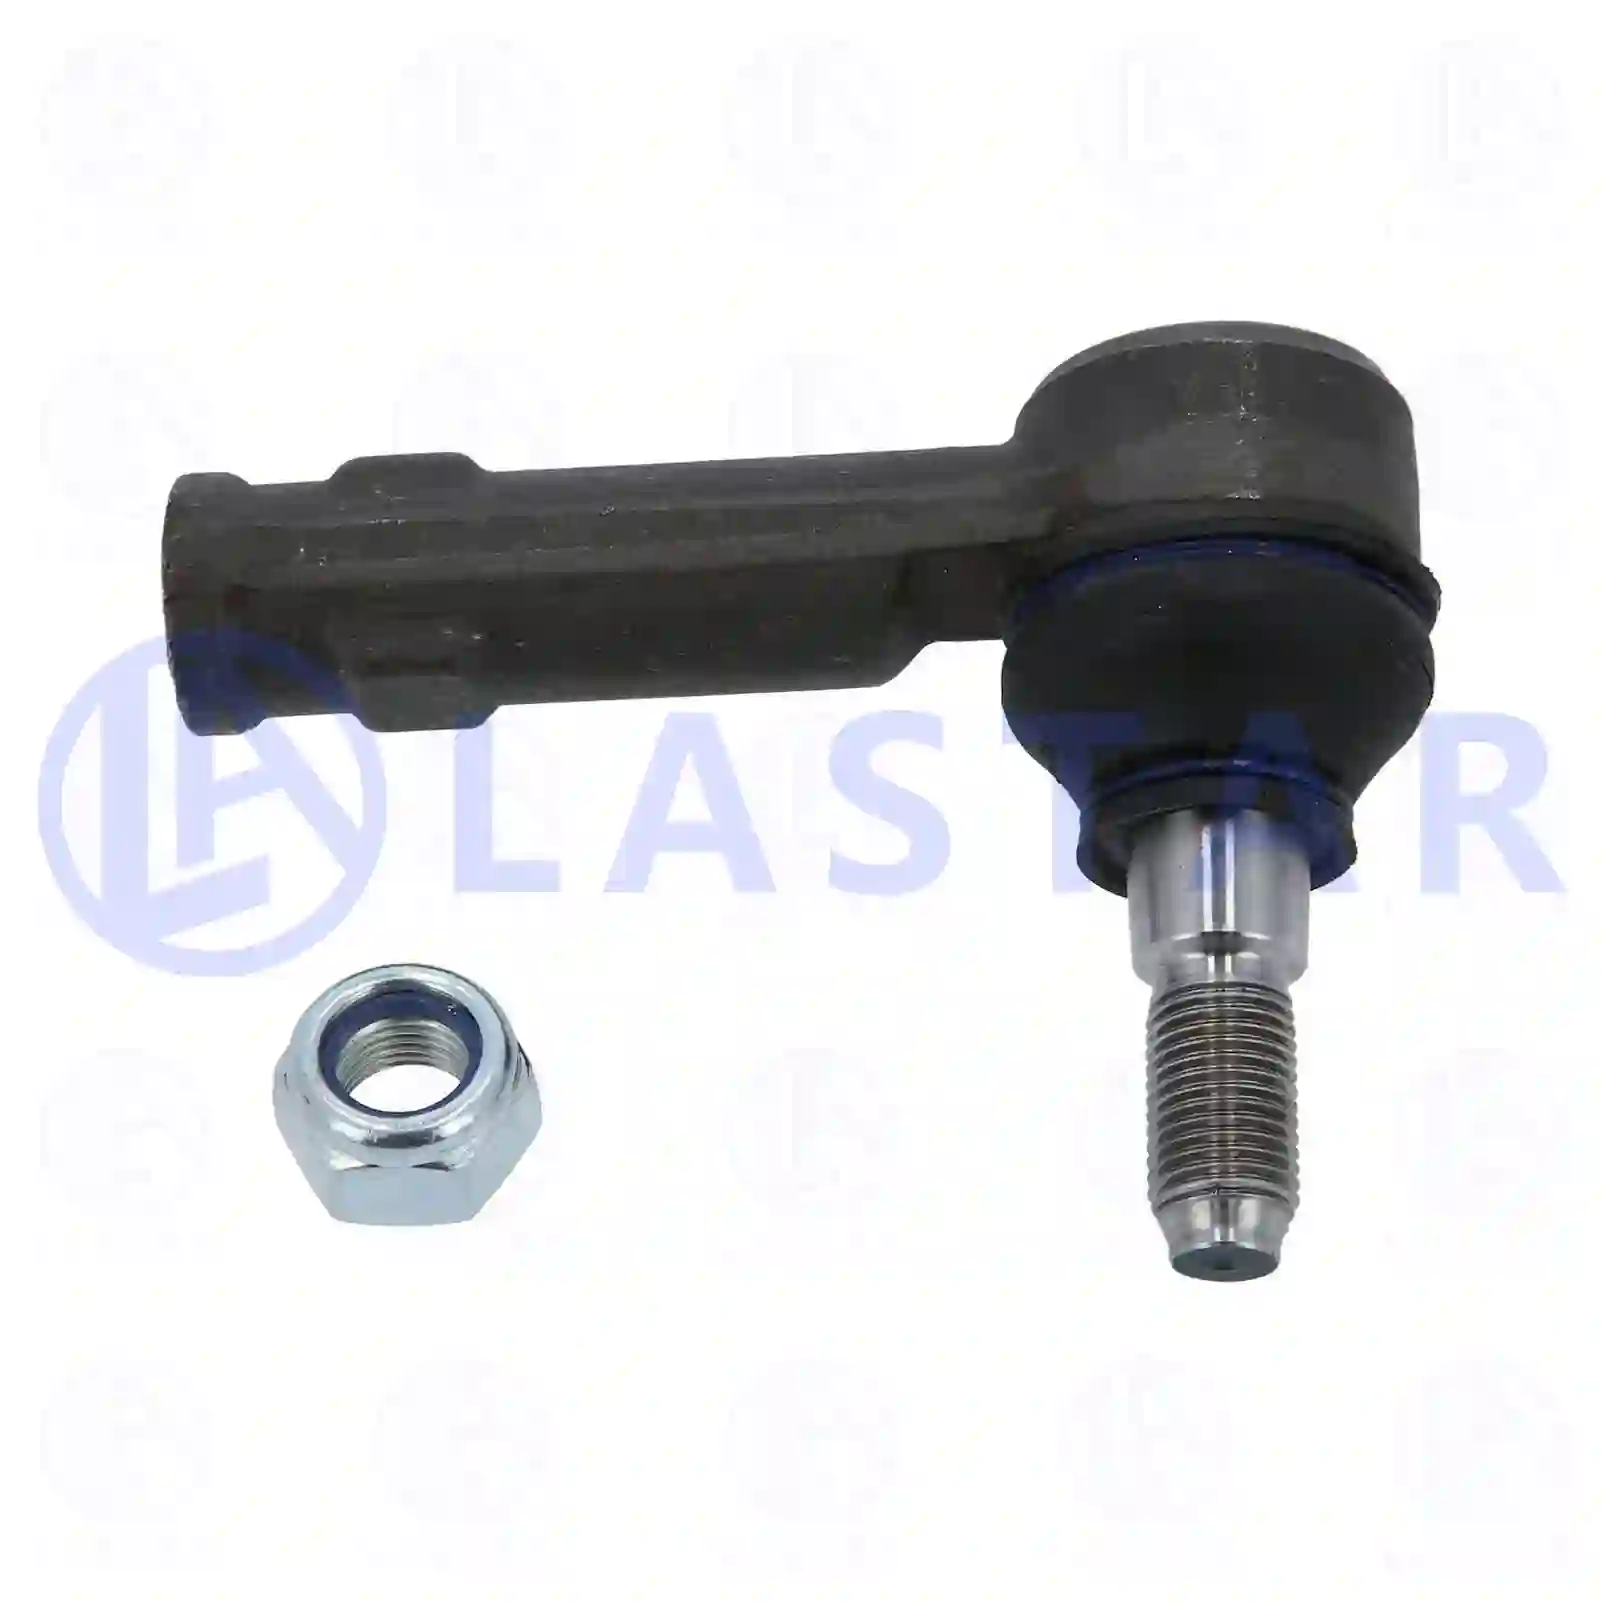 Ball joint, stabilizer, 77727083, 1707452 ||  77727083 Lastar Spare Part | Truck Spare Parts, Auotomotive Spare Parts Ball joint, stabilizer, 77727083, 1707452 ||  77727083 Lastar Spare Part | Truck Spare Parts, Auotomotive Spare Parts